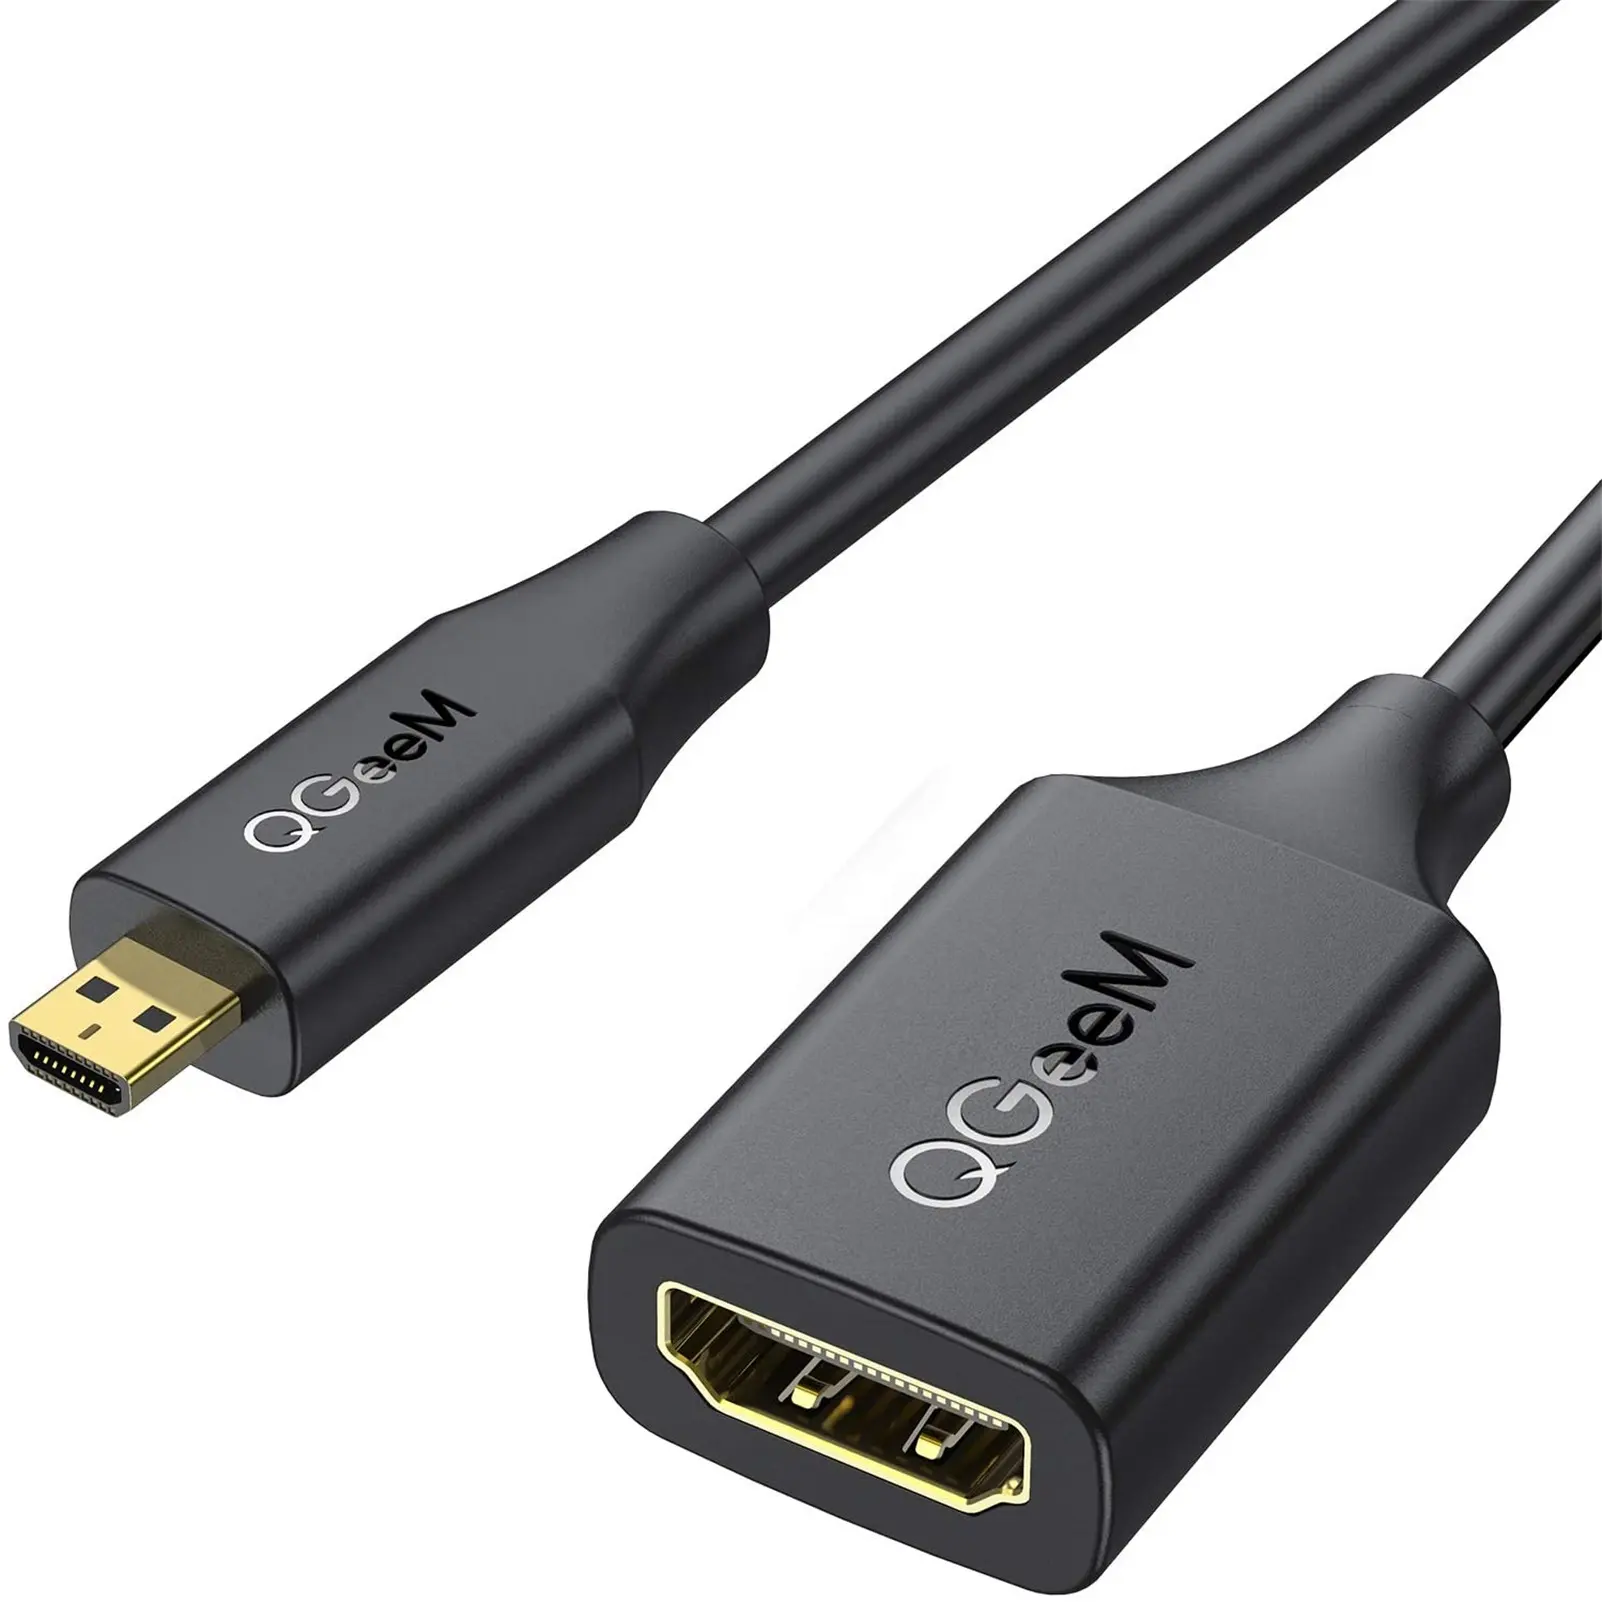 Micro HDMI to HDMI Adapter, QGeeM Micro HDMI Adapter (Male to Female) Support 1080P 3D 4K